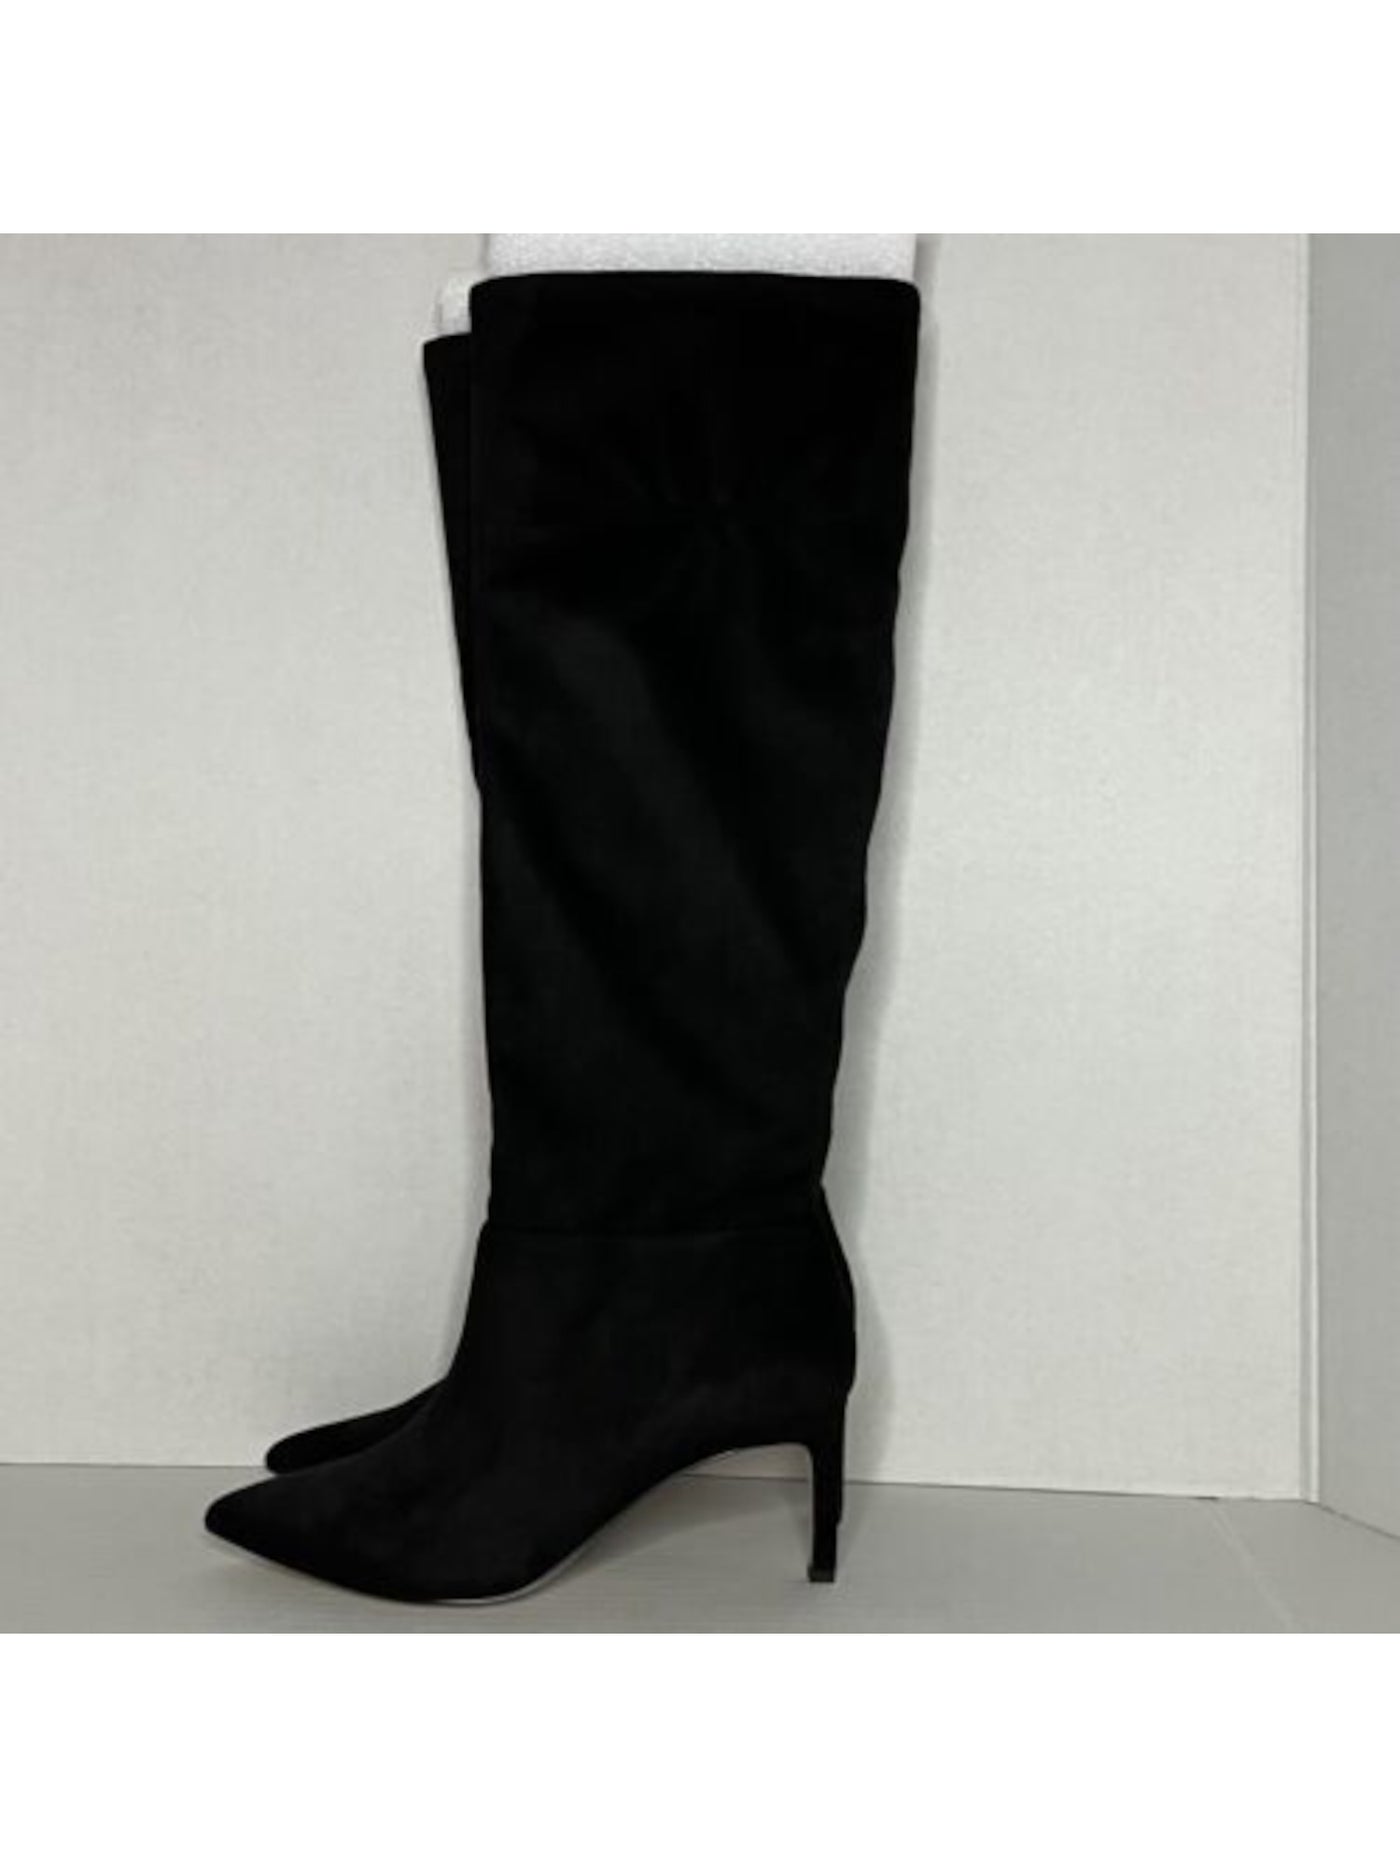 BCBGENERATION Womens Black Gored Padded Marlo-w Pointed Toe Stiletto Suede Heeled Boots 5.5 M